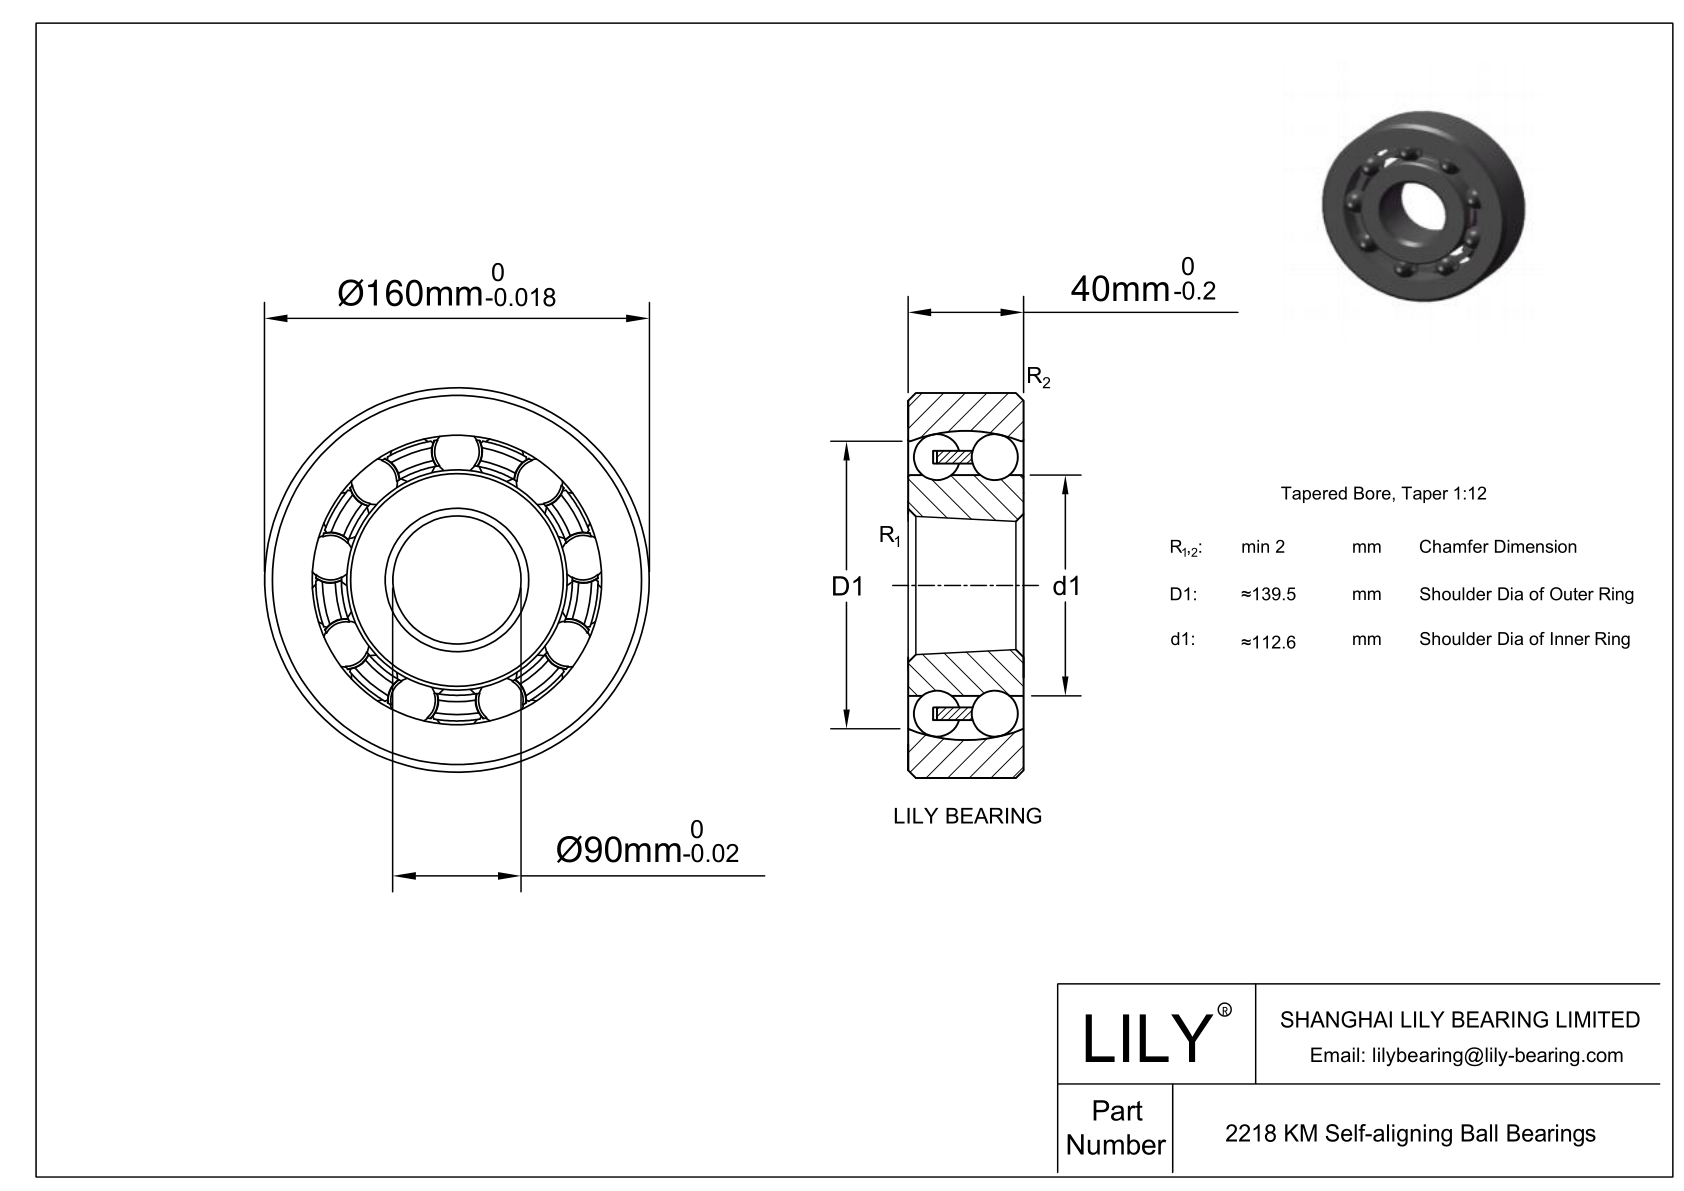 S2218 KM Stainless Steel Self Aligning Ball Bearings cad drawing